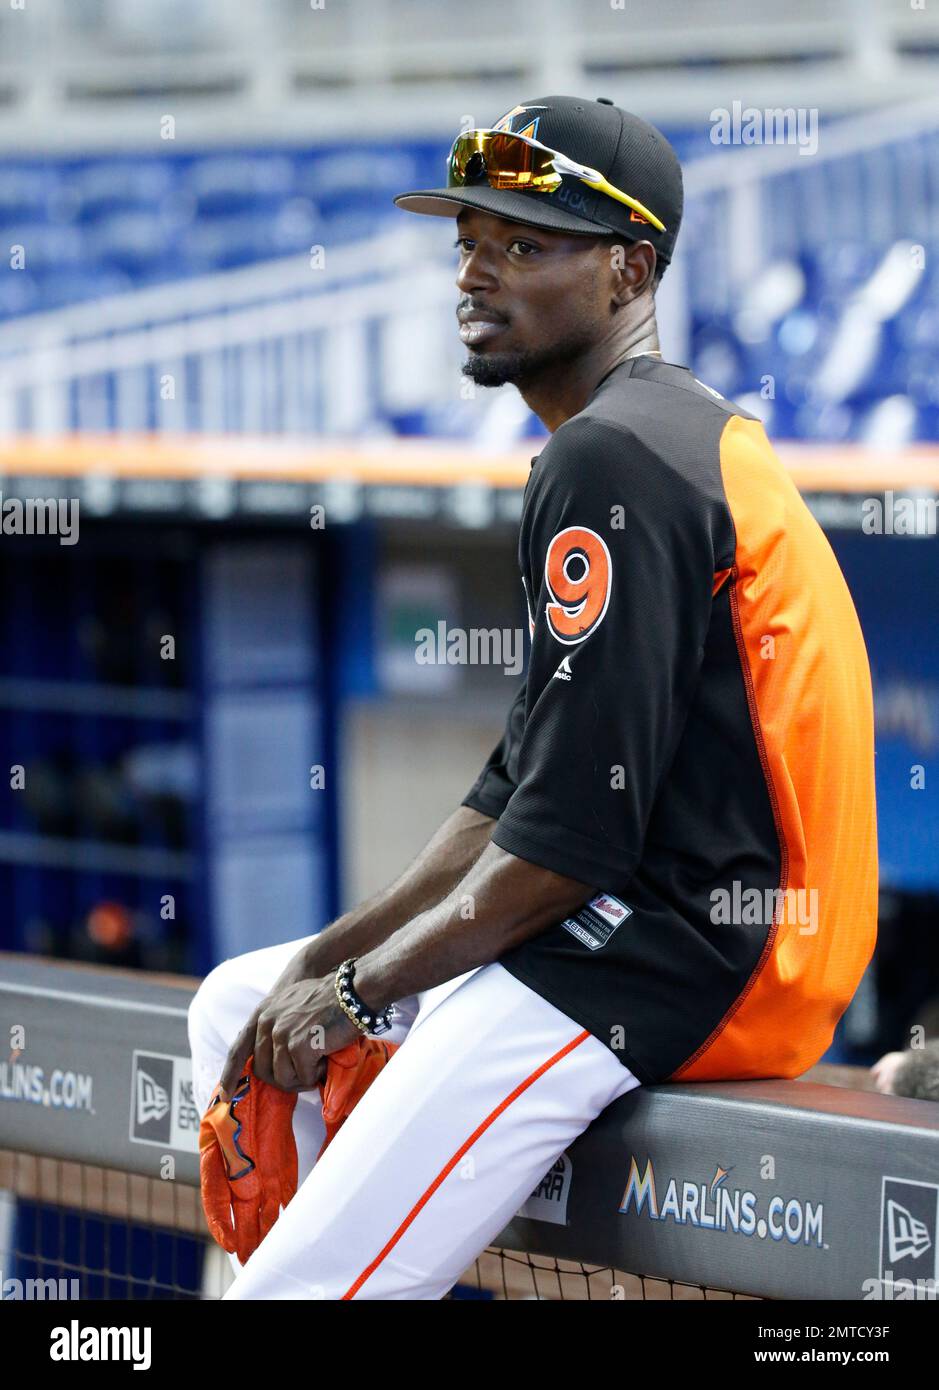 Miami Marlins' Dee Gordon puts on his batting gloves during batting  practice before the start of a baseball game against the Washington  Nationals, Tuesday, June 20, 2017, in Miami. (AP Photo/Wilfredo Lee